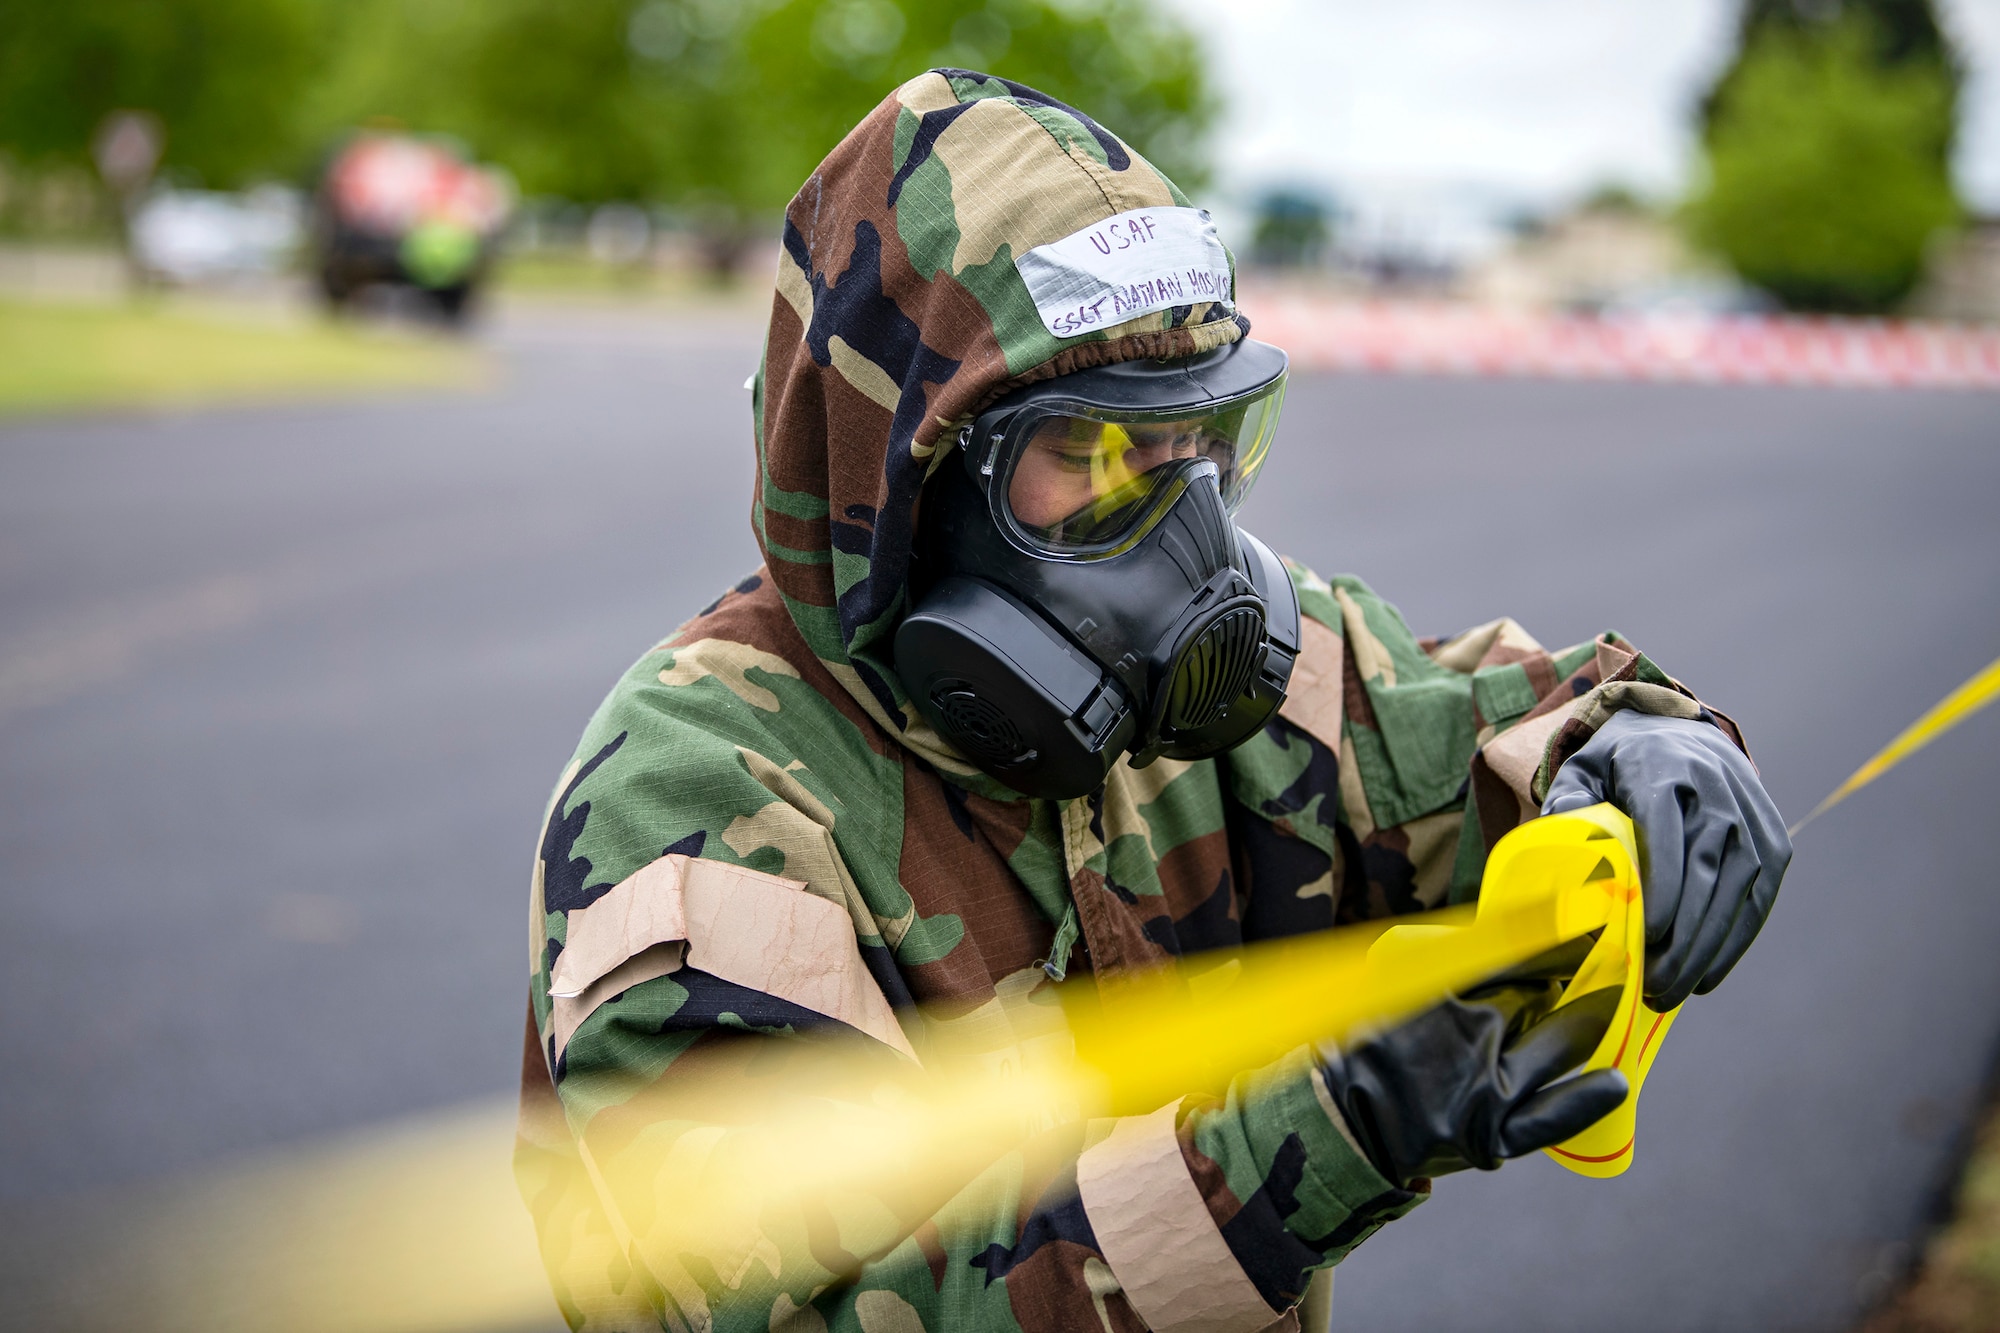 An Airman from the 423d Civil Engineer Squadron, places a marking sign on a flagging ribbon during an exercise at RAF Alconbury, England, May 19, 2022. The exercise was geared towards training Airmen on how to properly control and examine a contaminated area after a simulated chemical attack while in Mission Oriented Protective Posture Gear. (U.S. Air Force photo by Staff Sgt. Eugene Oliver)